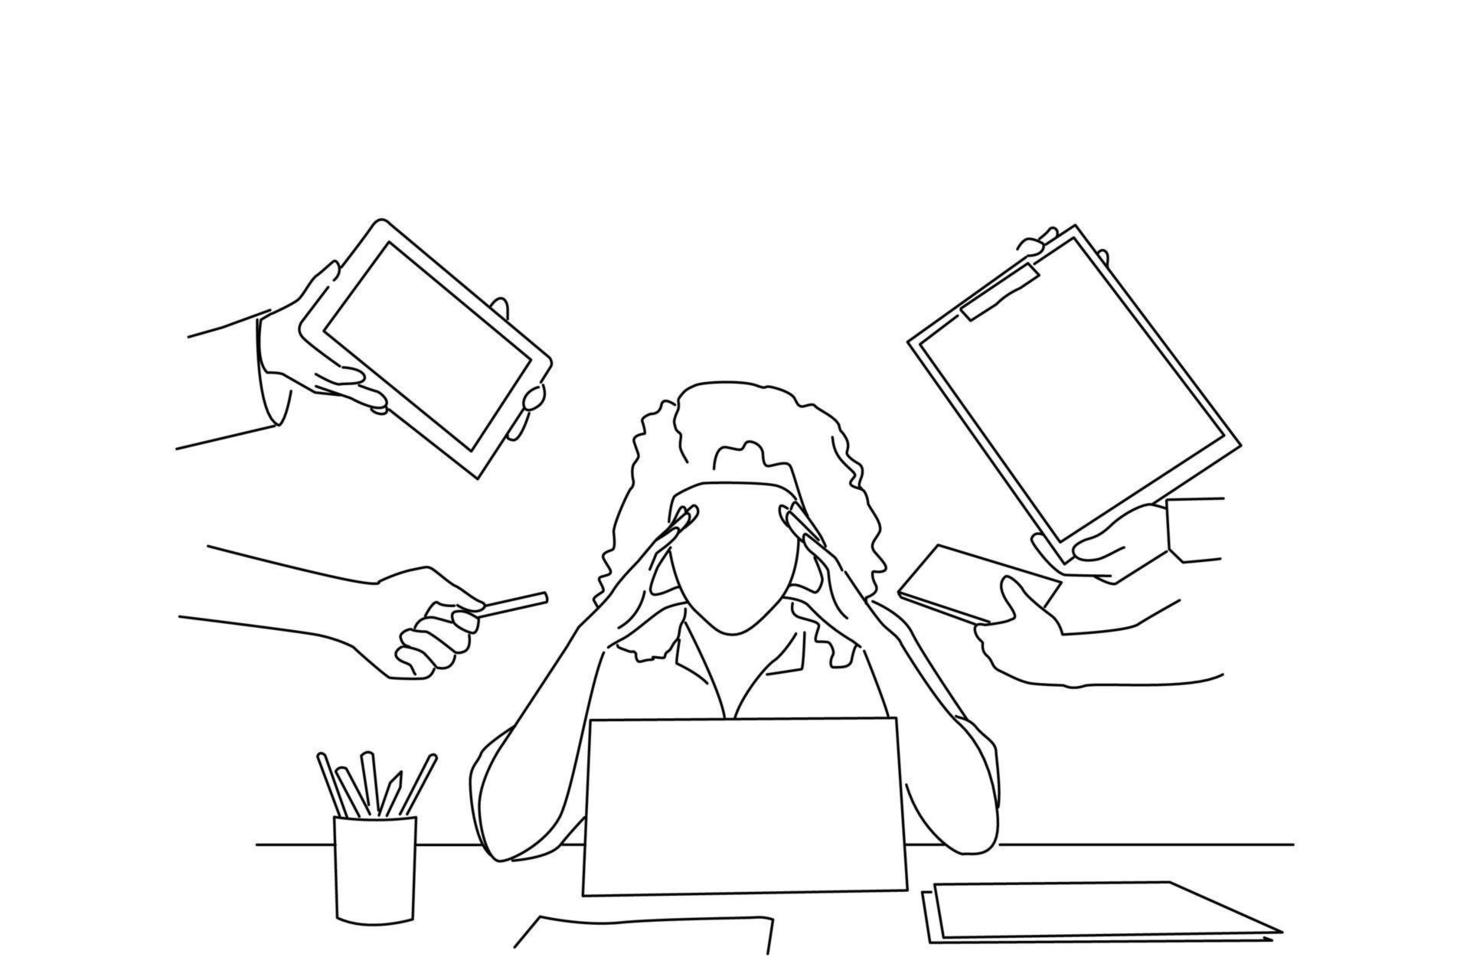 Cartoon of Multitasking, Overworked Businesswoman Sitting Touching Head Ignoring Colleagues. line art style vector